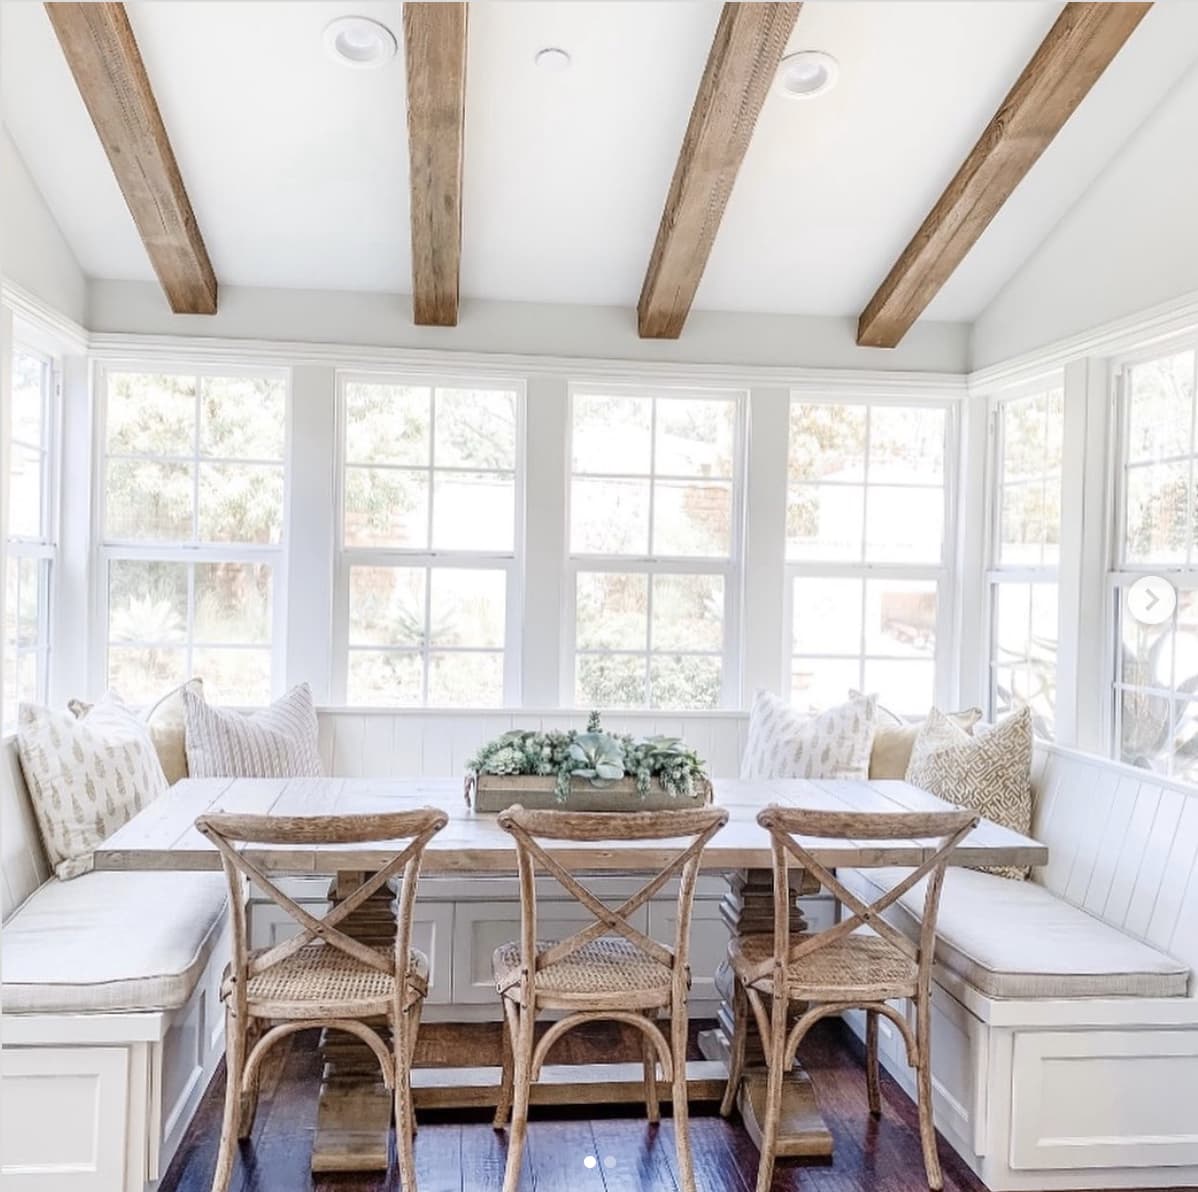 Kitchen breakfast nook with a large window and ceiling beams